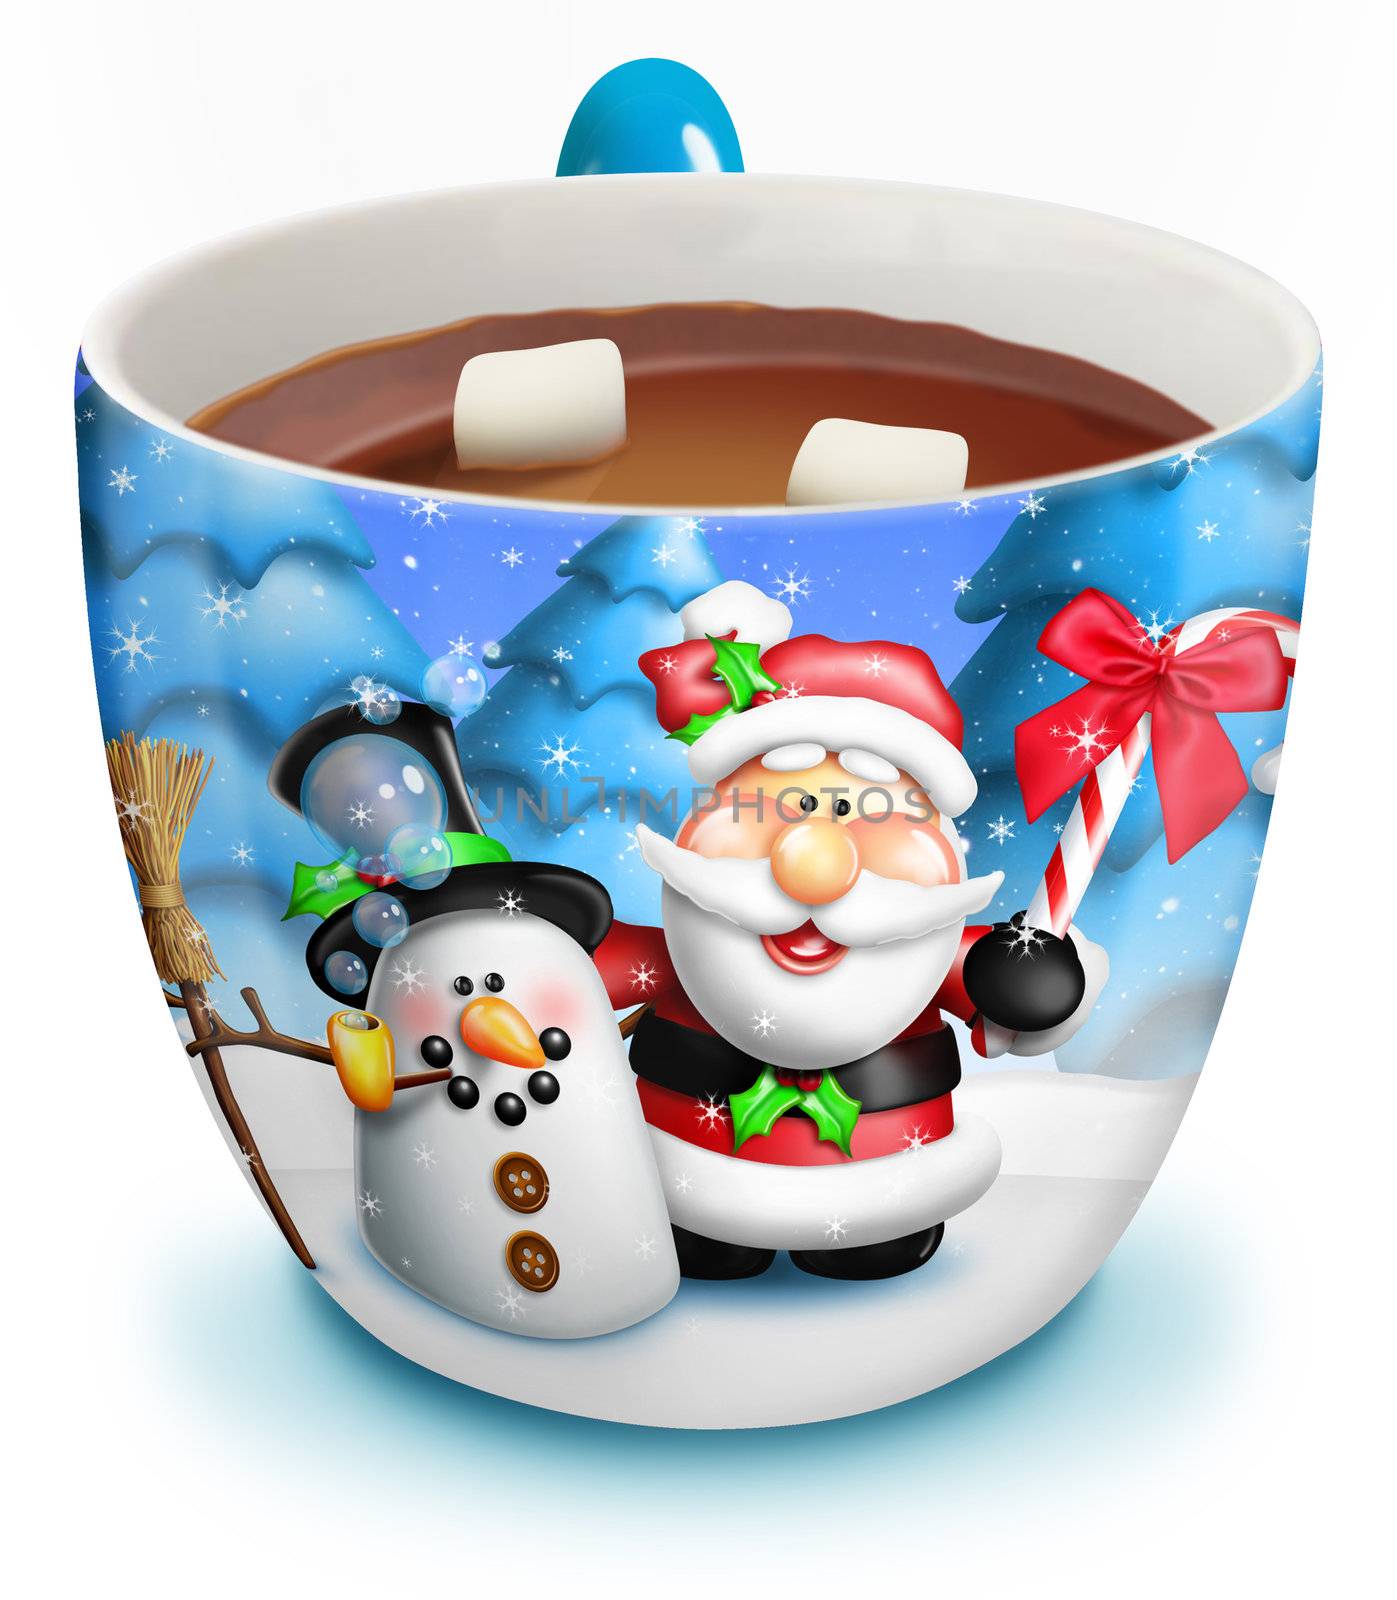 Christmas Cup of Hot Chocolate